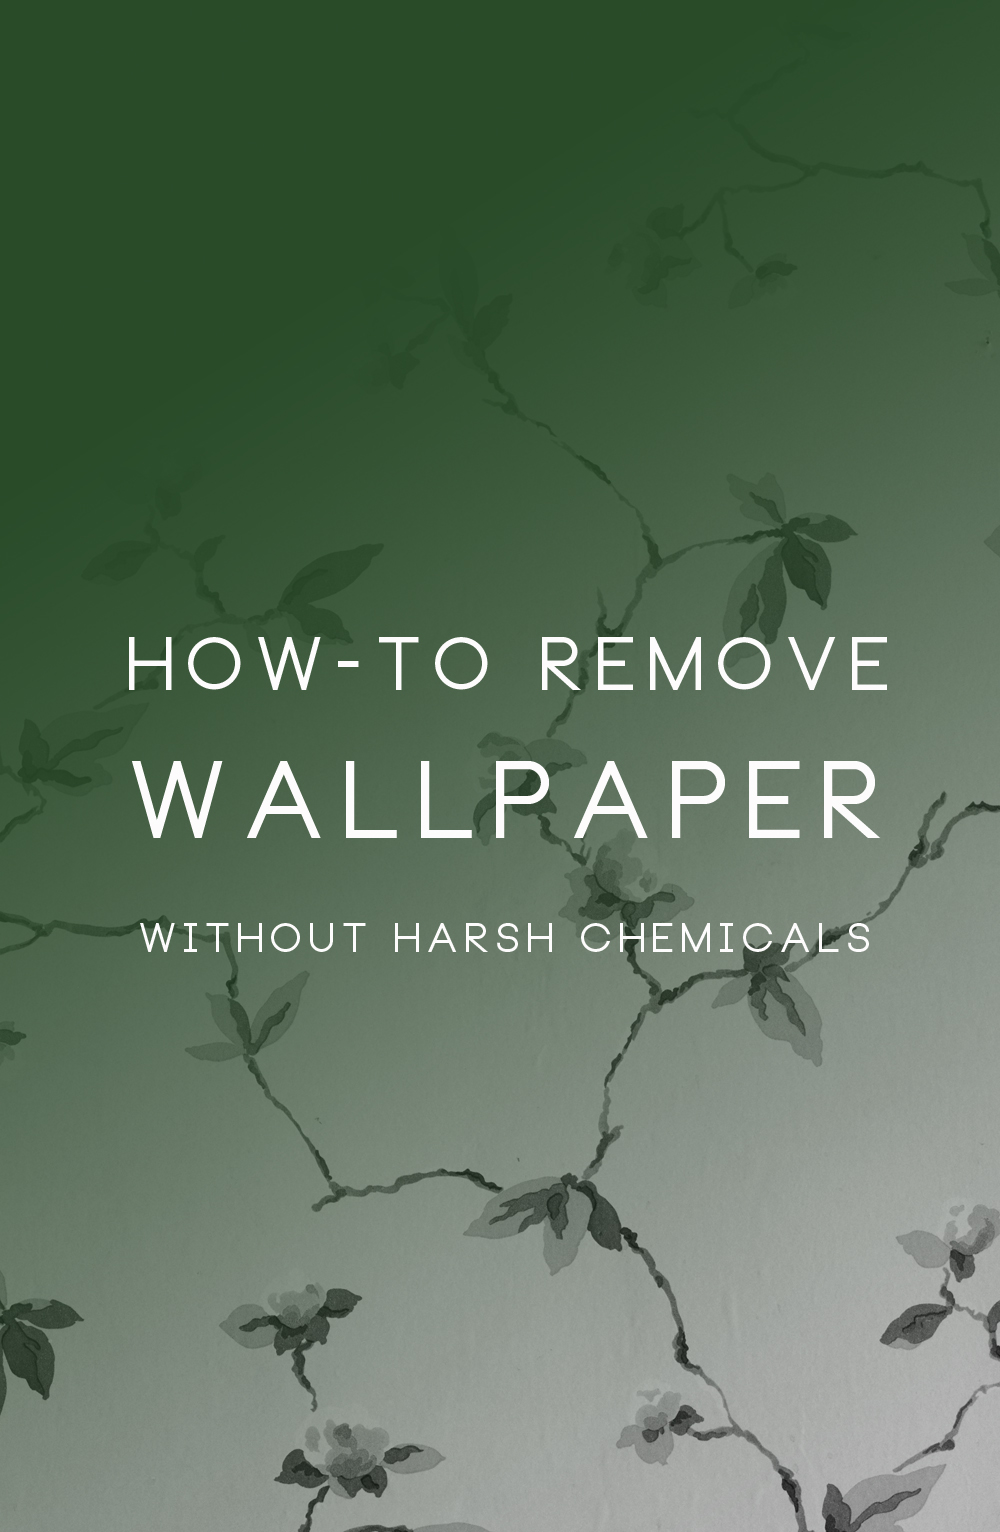 How to remove wallpaper without harsh chemicals.